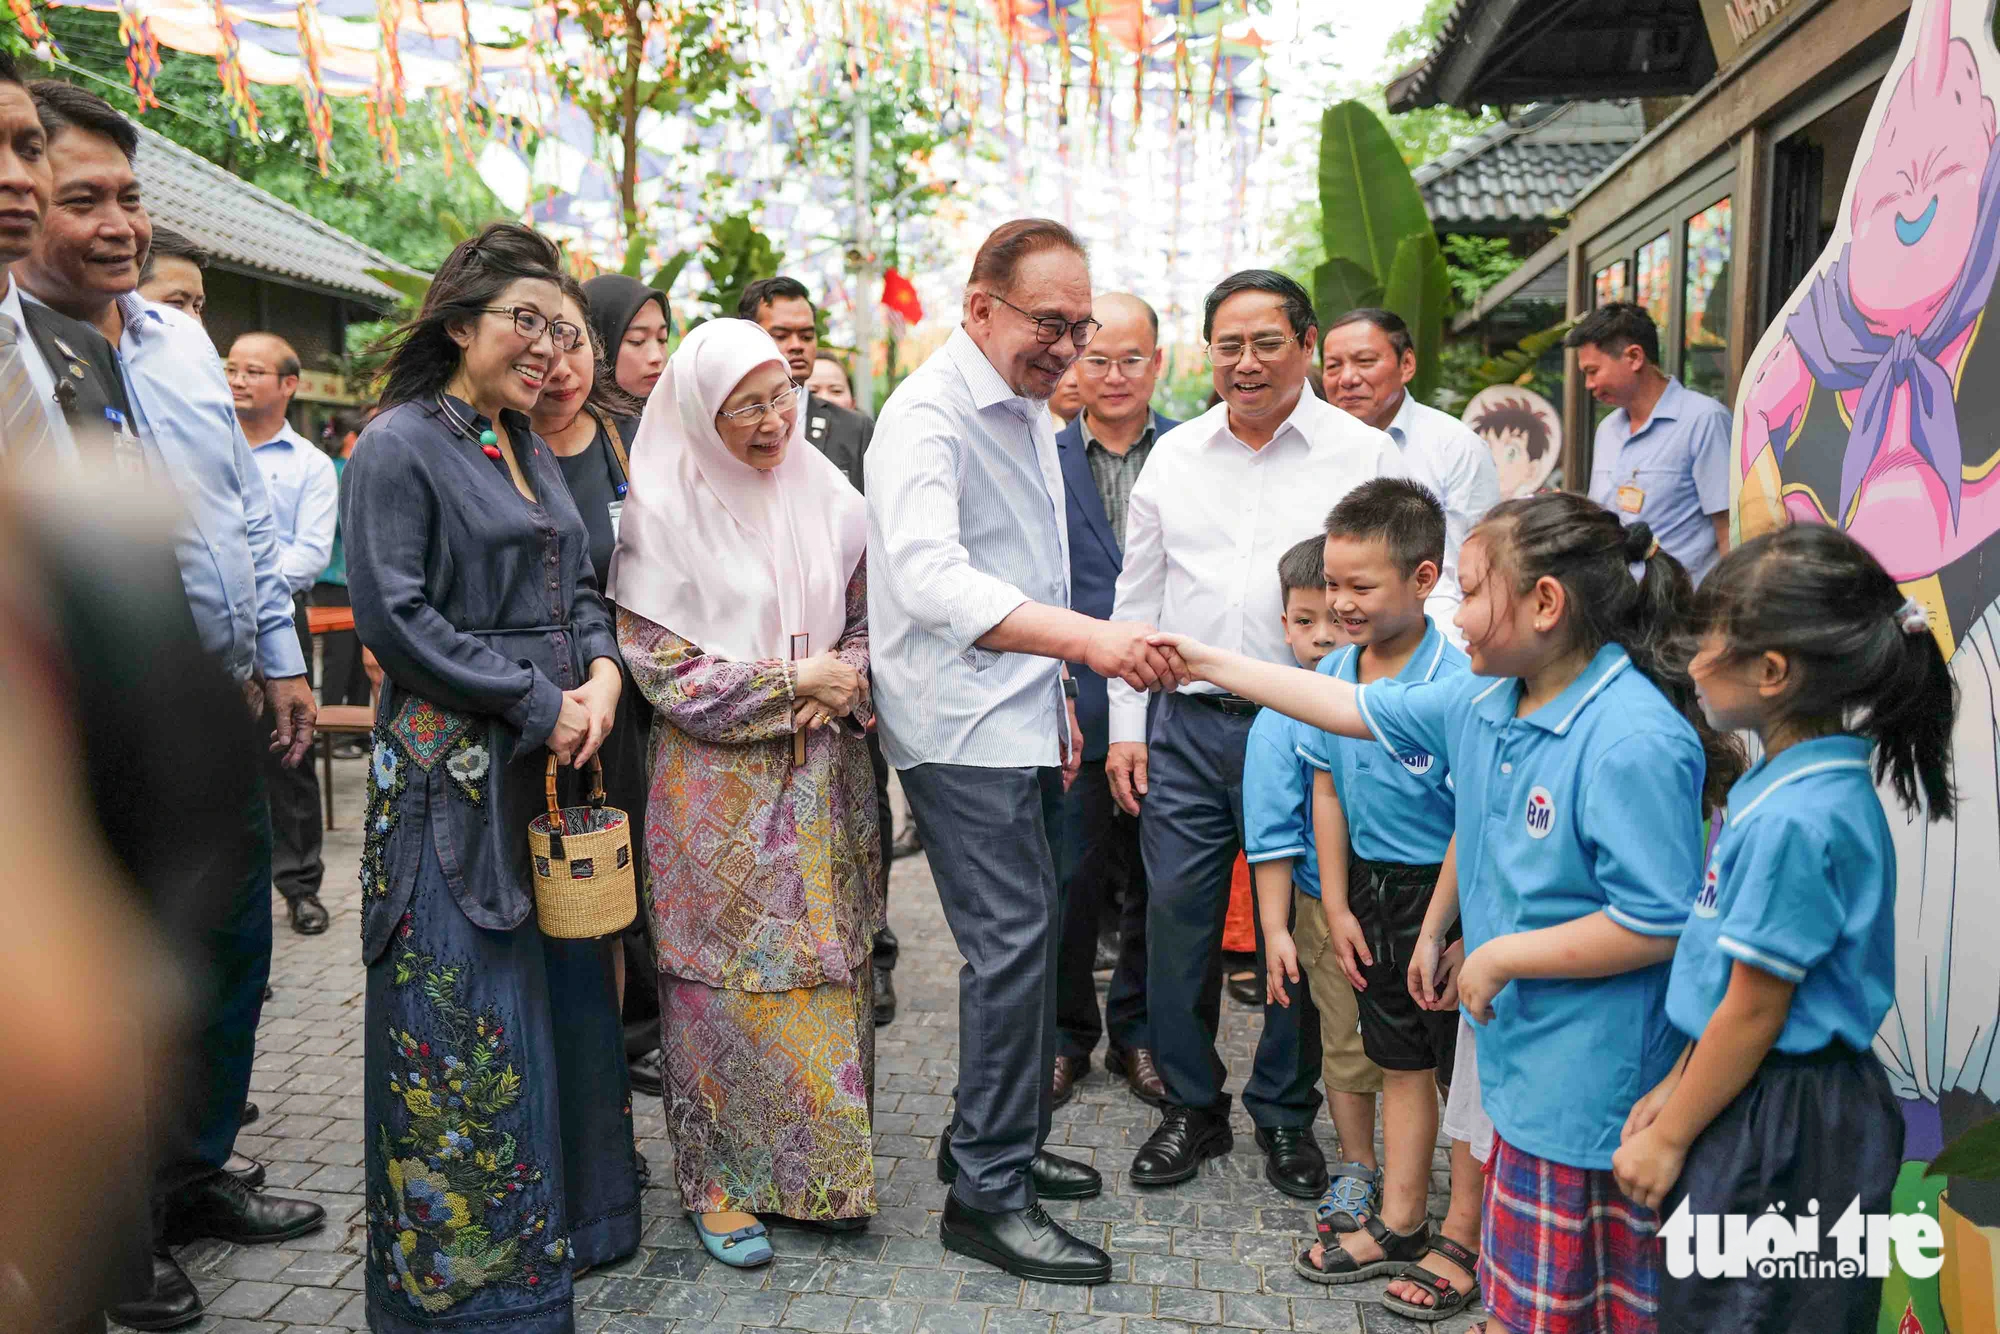 Malaysia’s Prime Minister Anwar Ibrahim shakes hands with a Vietnamese student at the 19-12 book street in Hanoi, July 21, 2023. Photo: Nguyen Khanh / Tuoi Tre